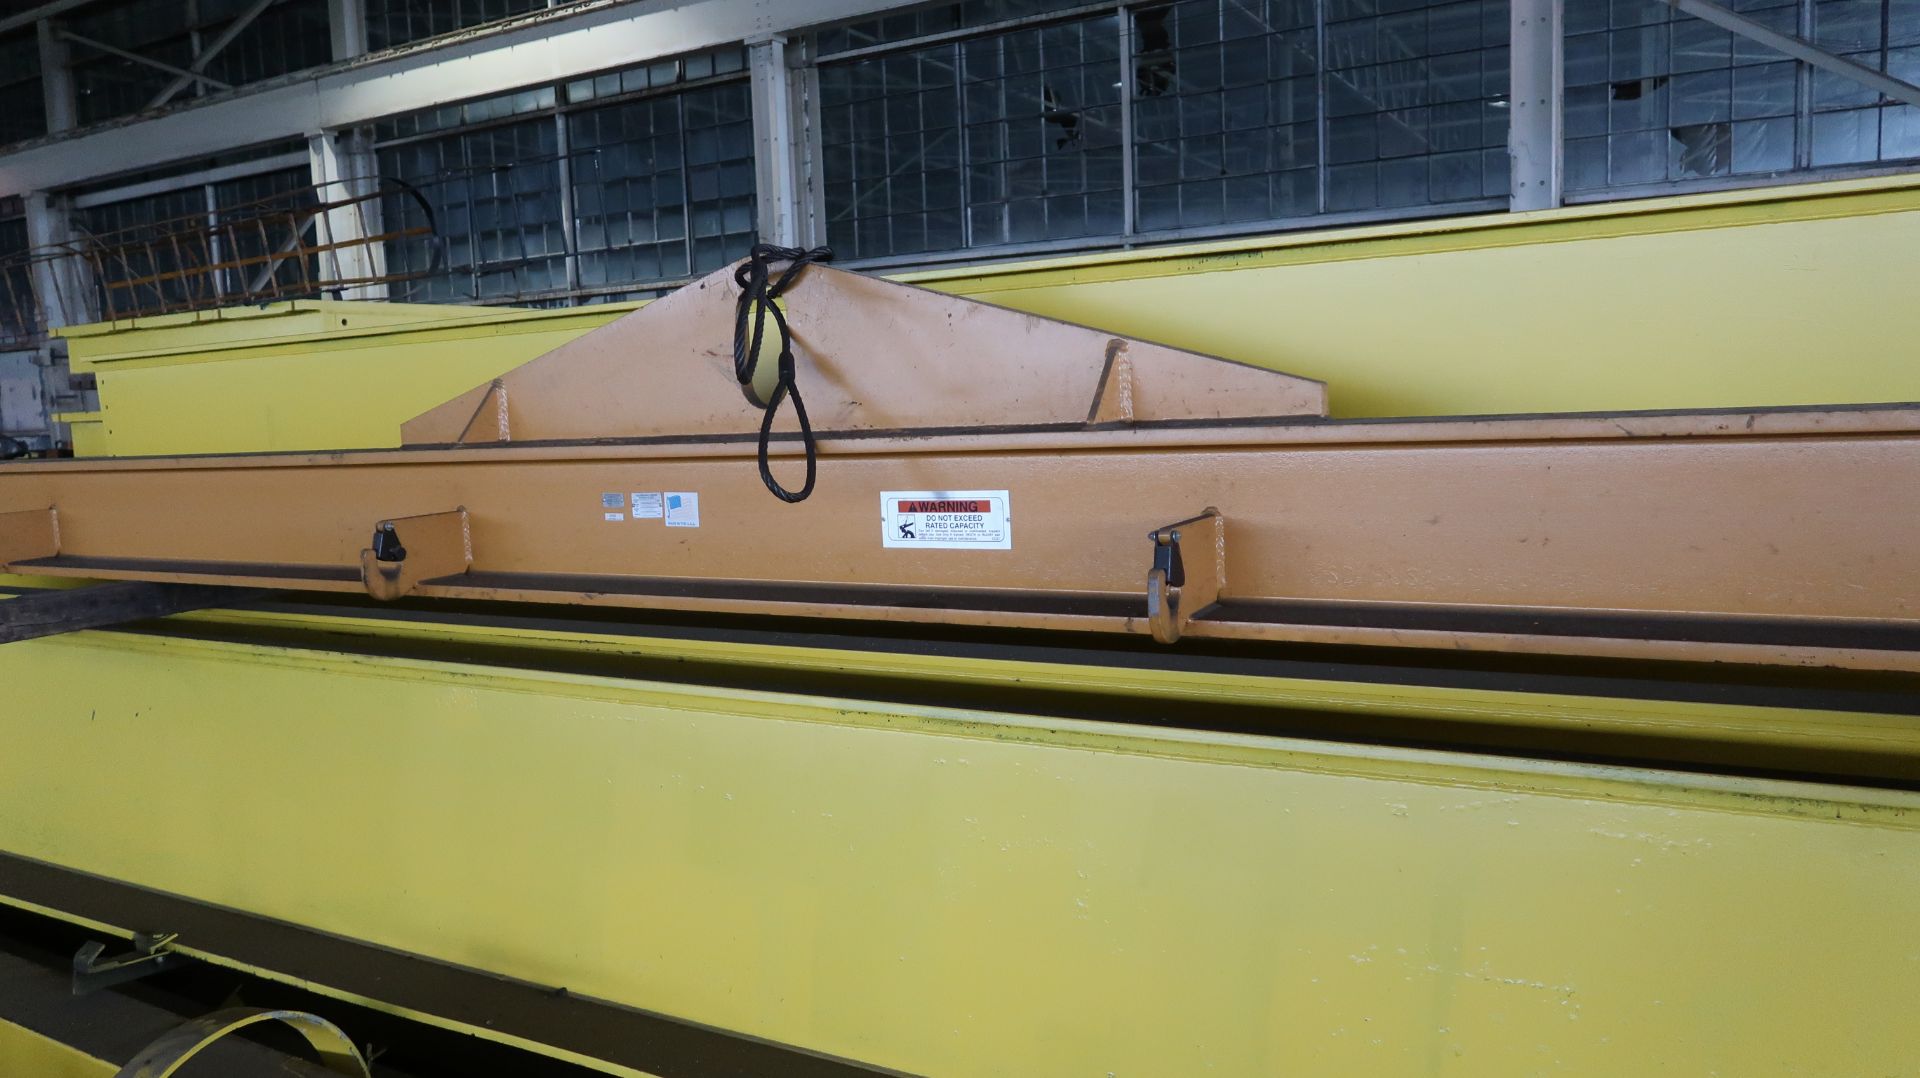 3-Ton Heavy Duty Twin Basket Sling, Caldwell Group, Model: 22S-3-35 - Image 2 of 4